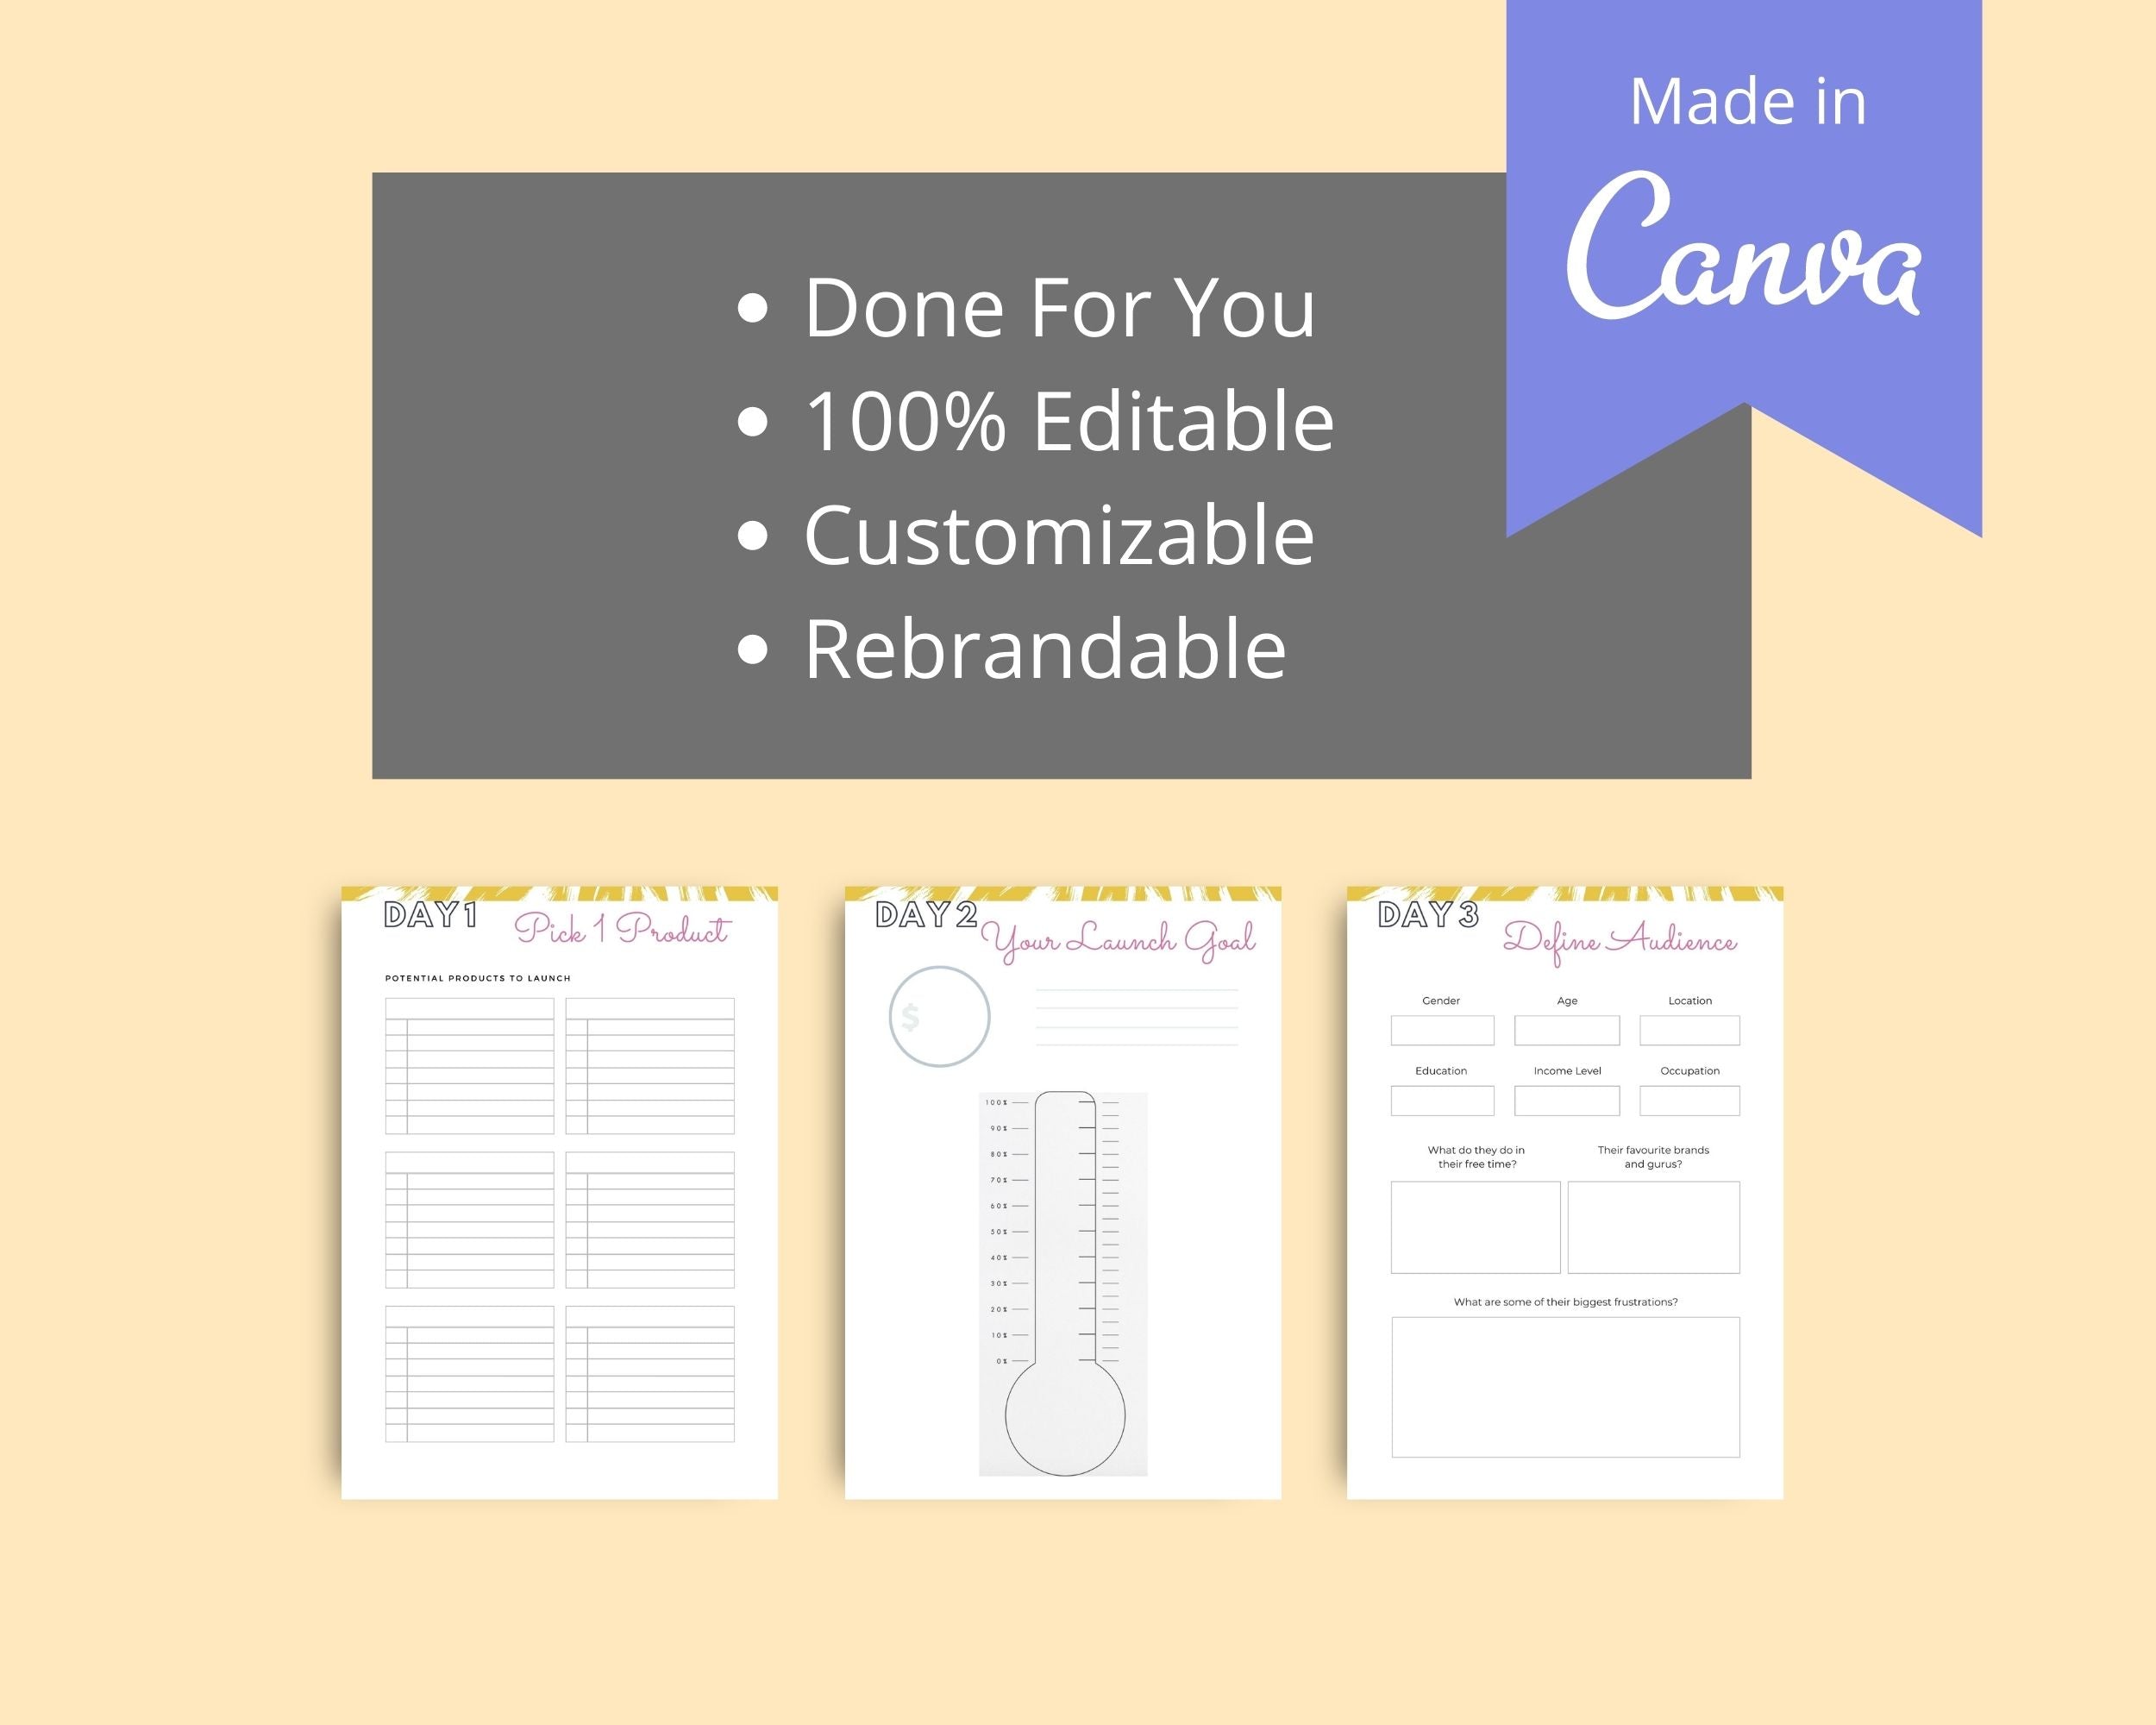 2 Weeks Launch Your Product Challenge | Editable Canva Template A4 Size